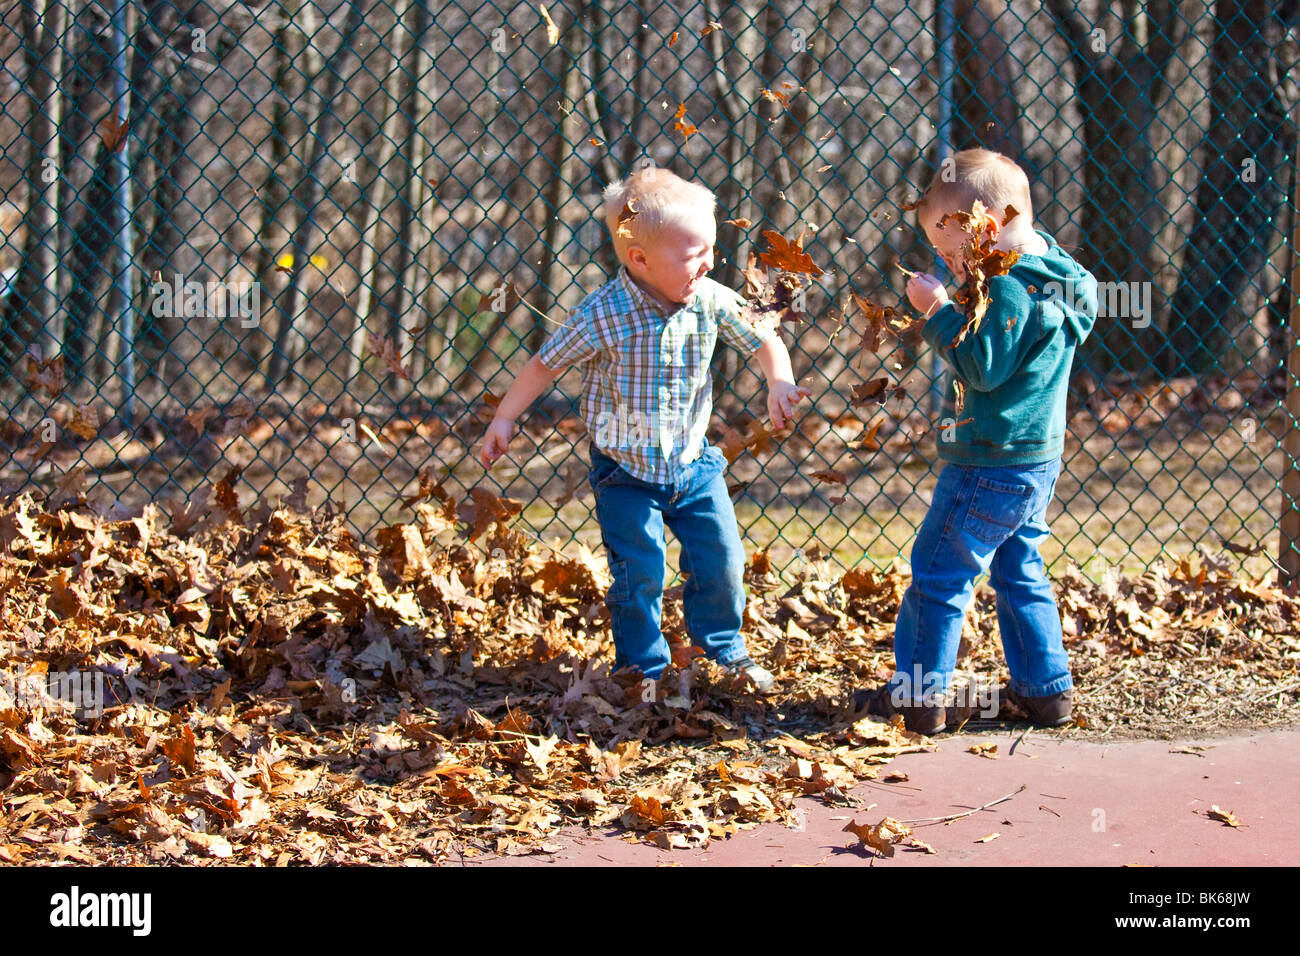 Playing in the leaves at a park in South Orange, New Jersey Stock Photo